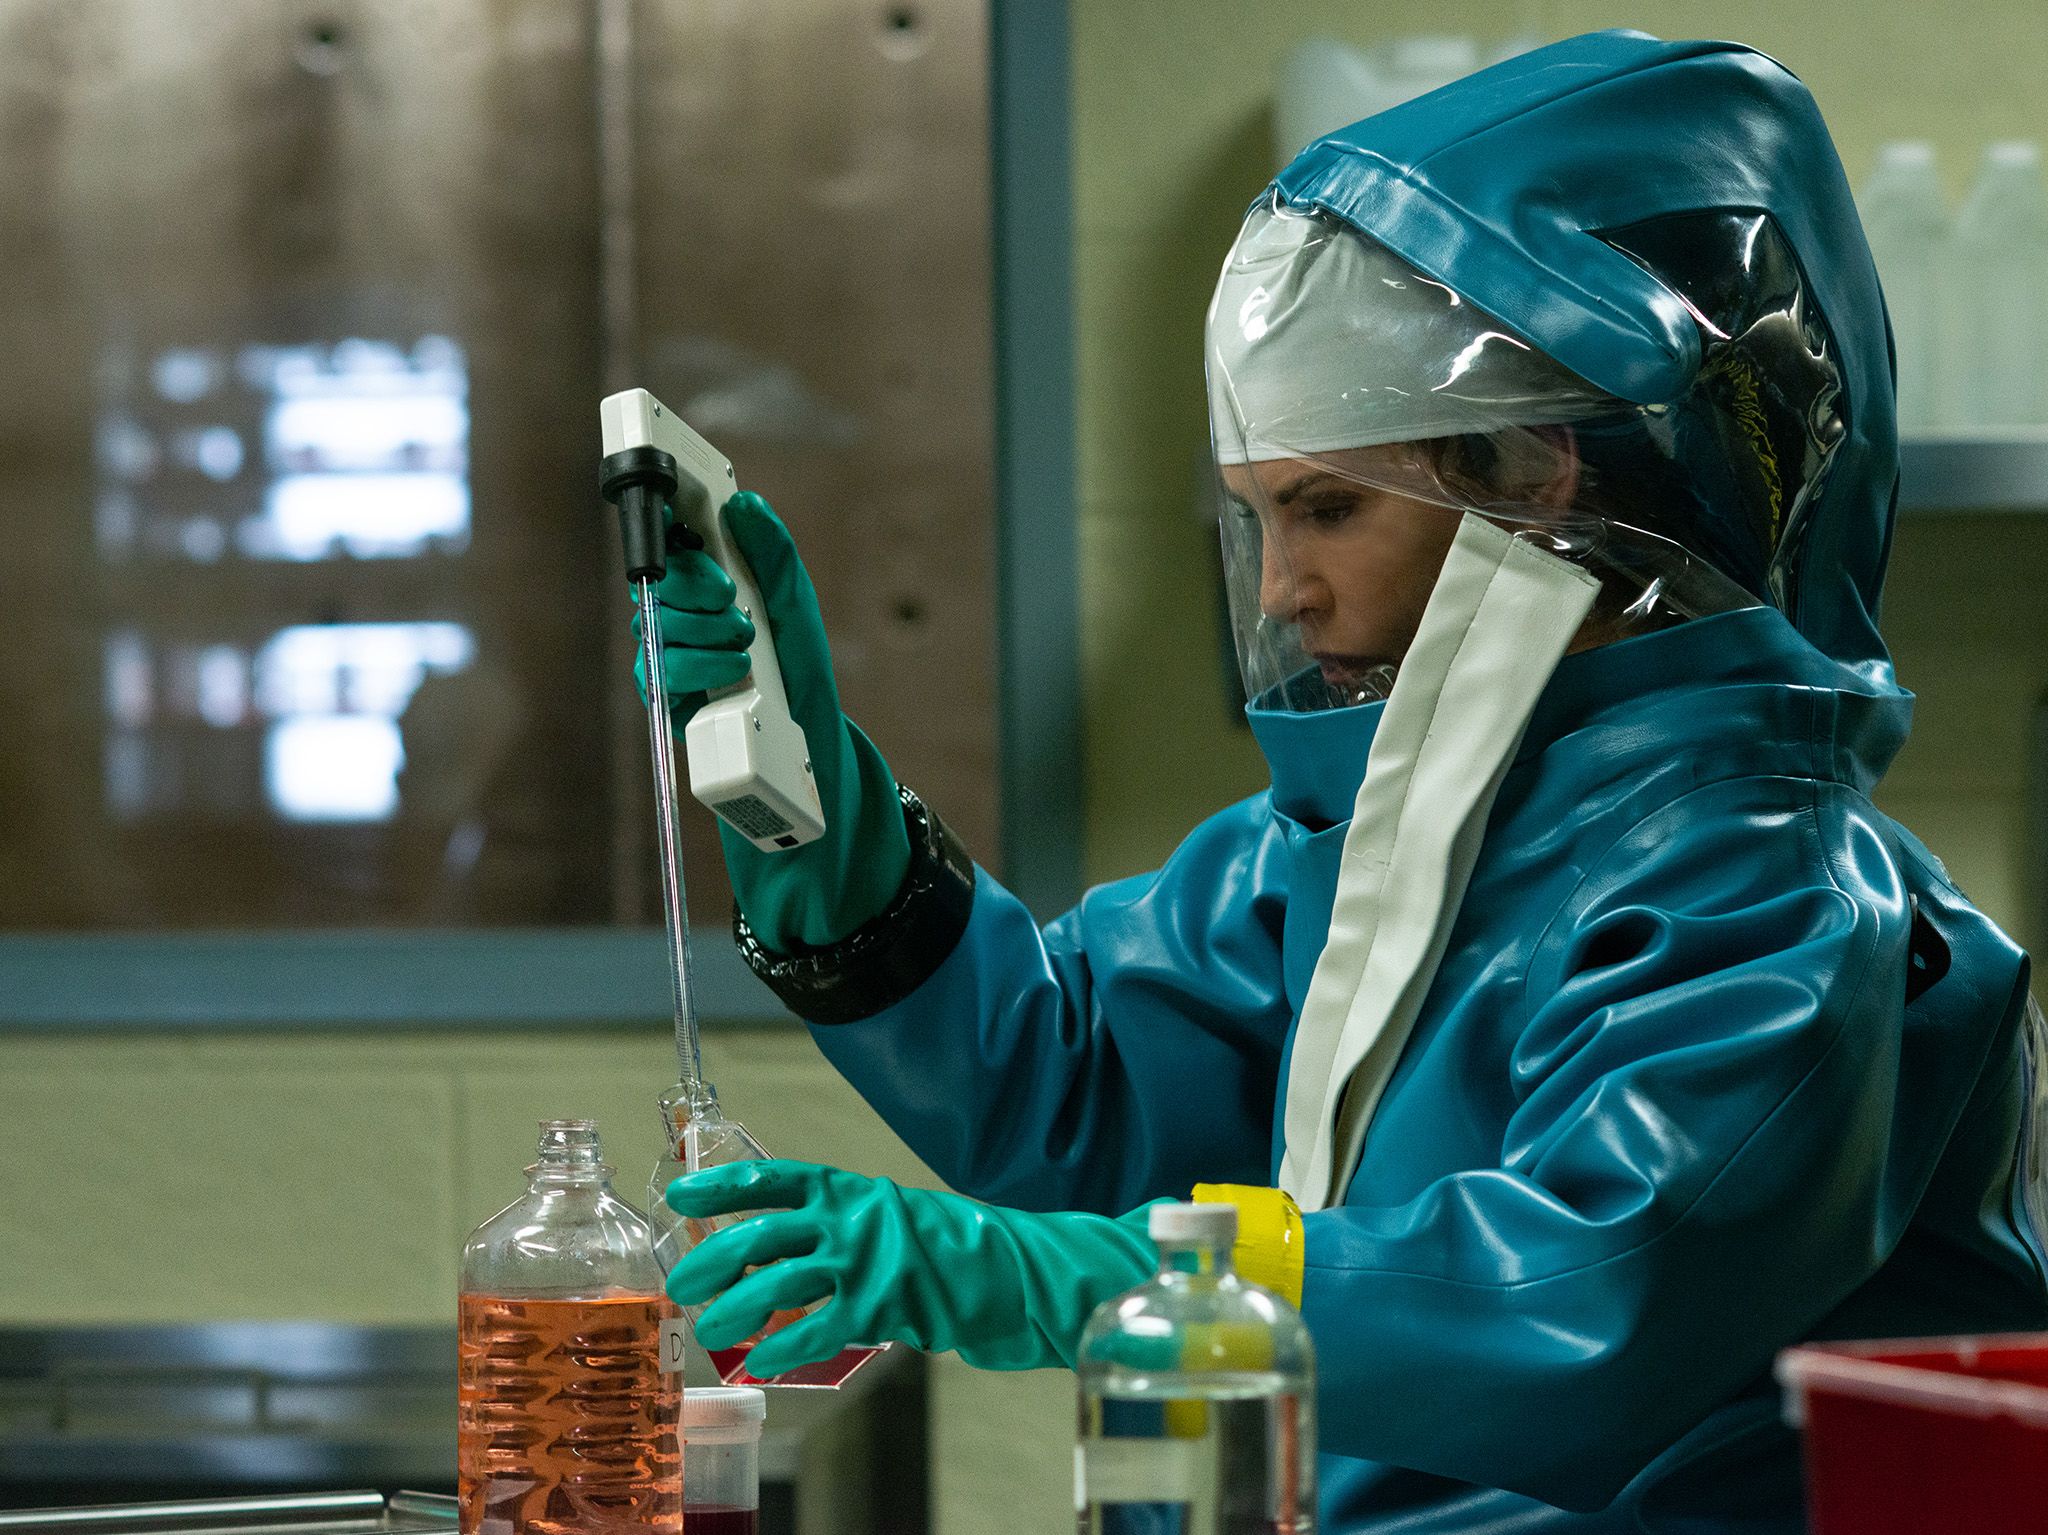 Dr. Nancy Jaax (Julianna Margulies) working in her pathology lab.  This image is from The Hot Zone. [Photo of the day - May 2020]